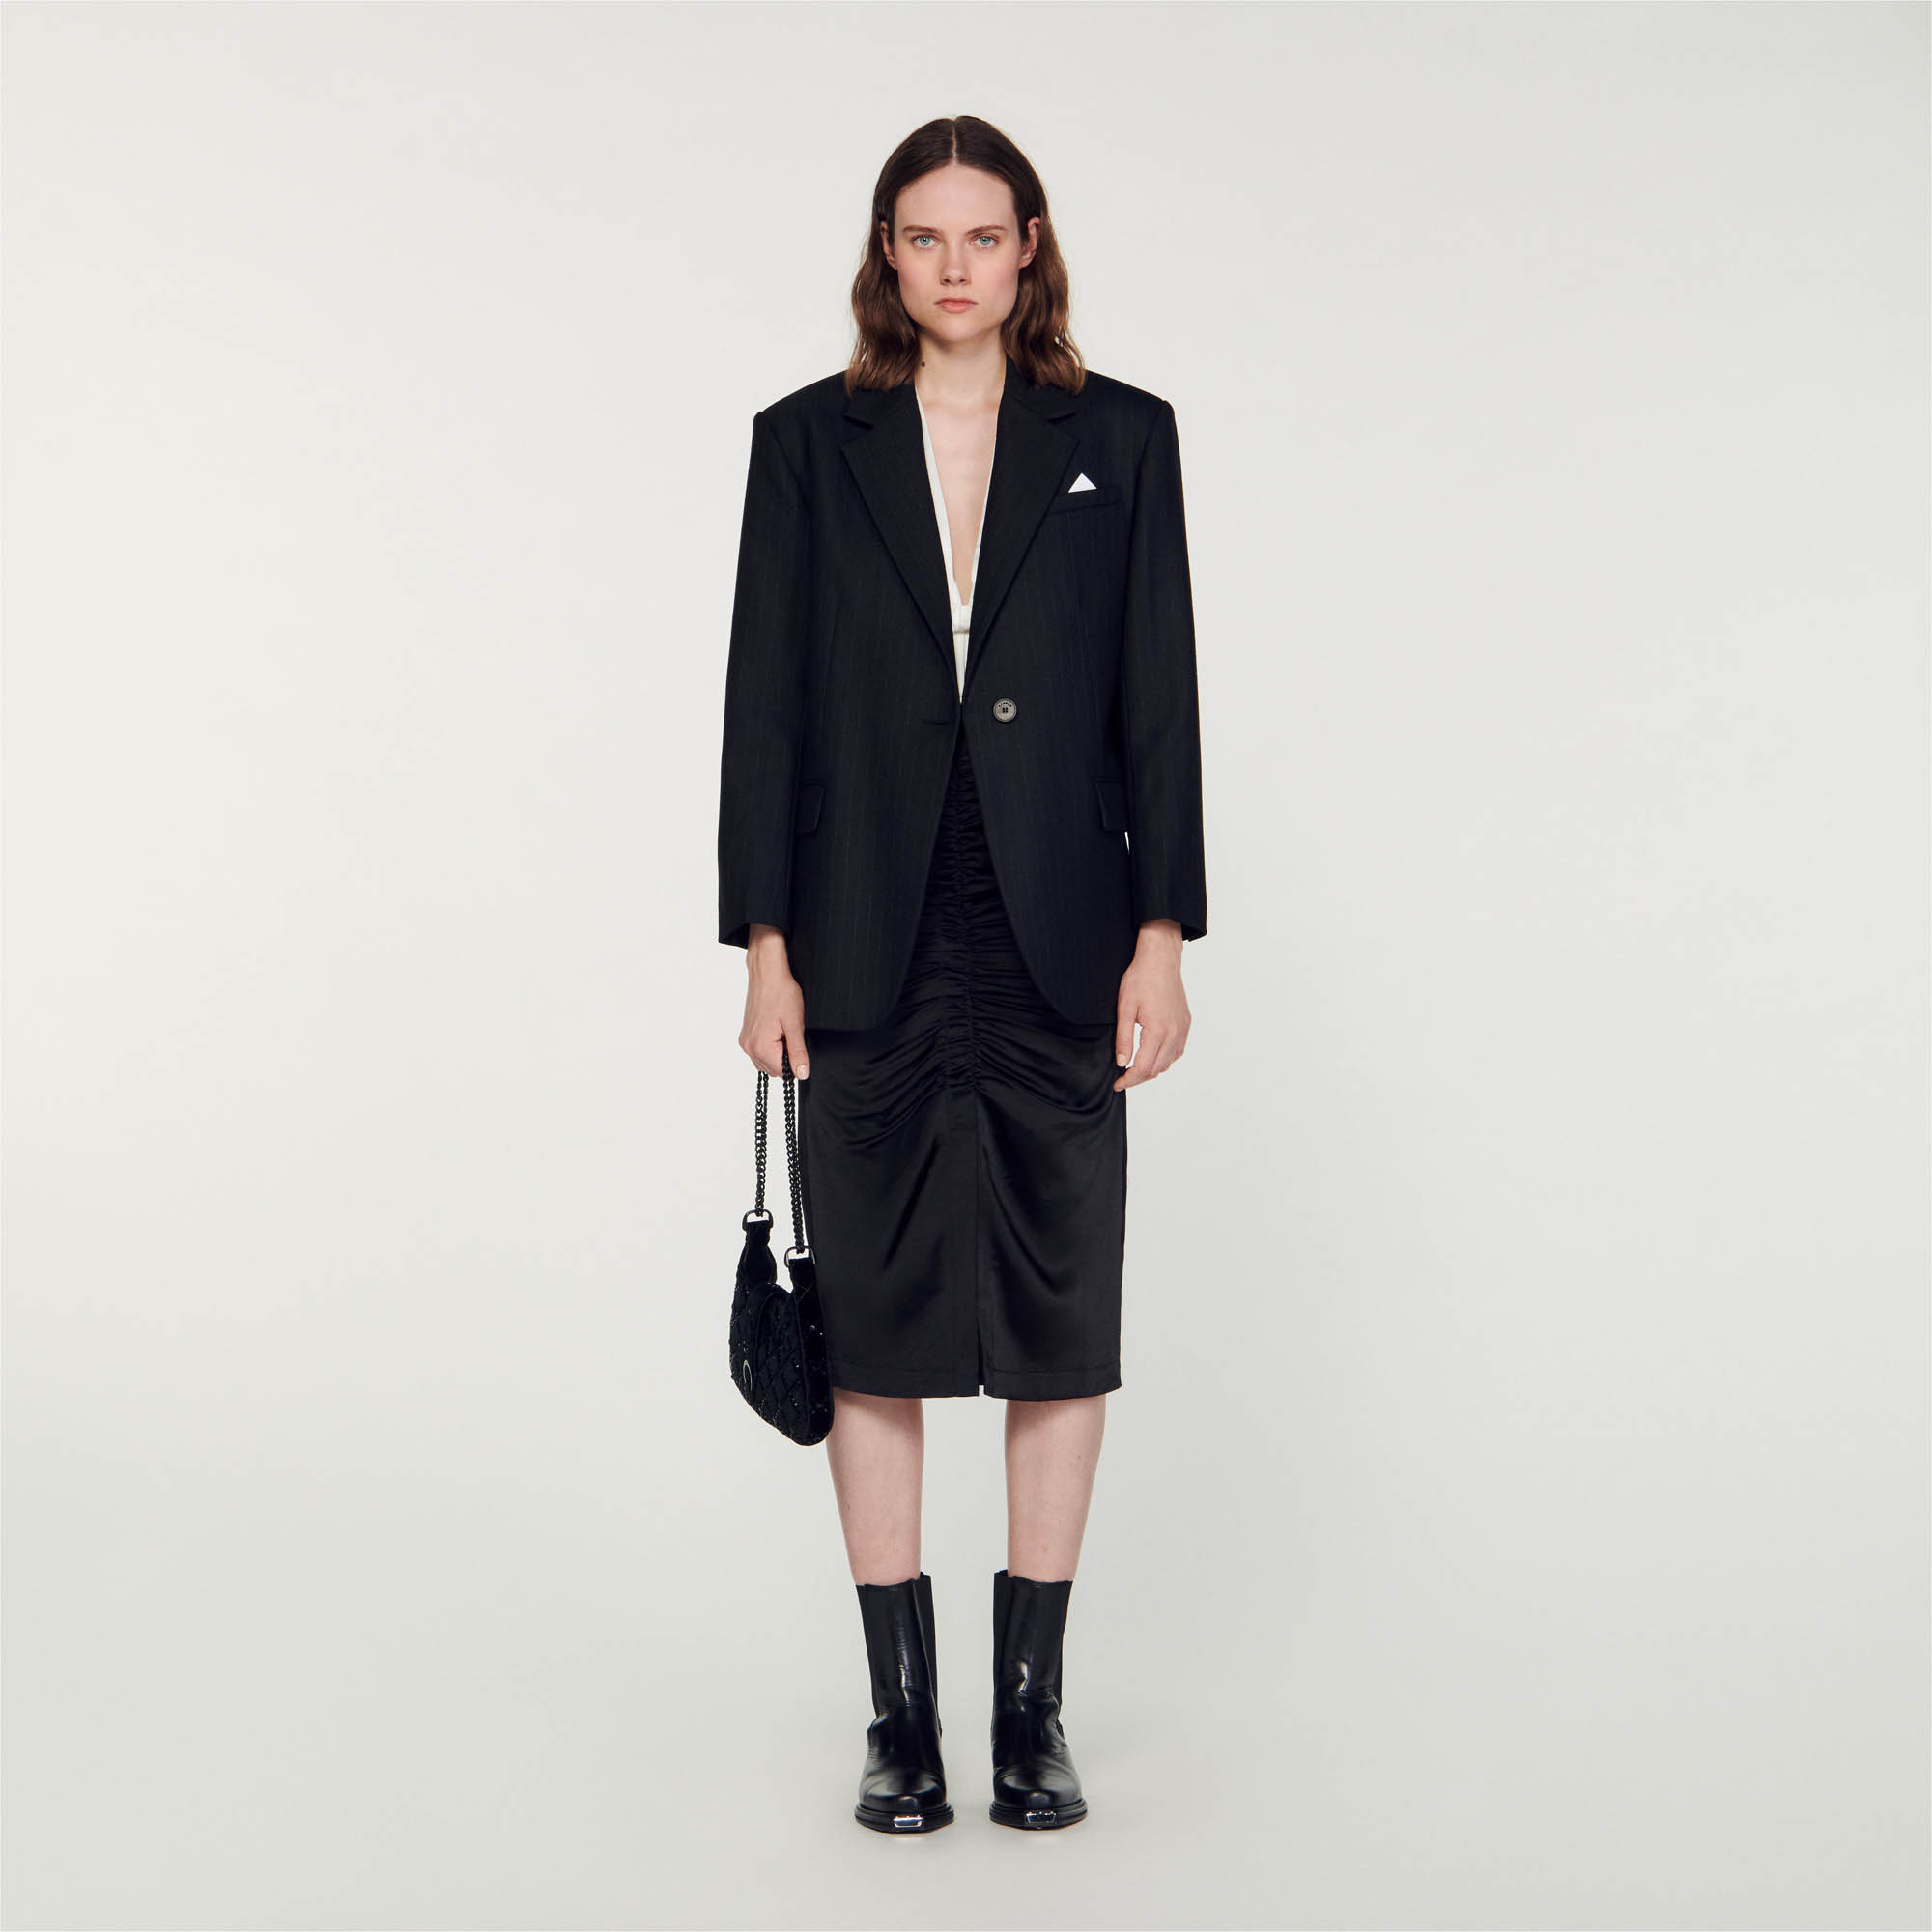 Sandro polyester Oversized blazer embellished with thin stripes, featuring long sleeves, a suit collar, flap pockets on the sides and a welt pocket on the chest